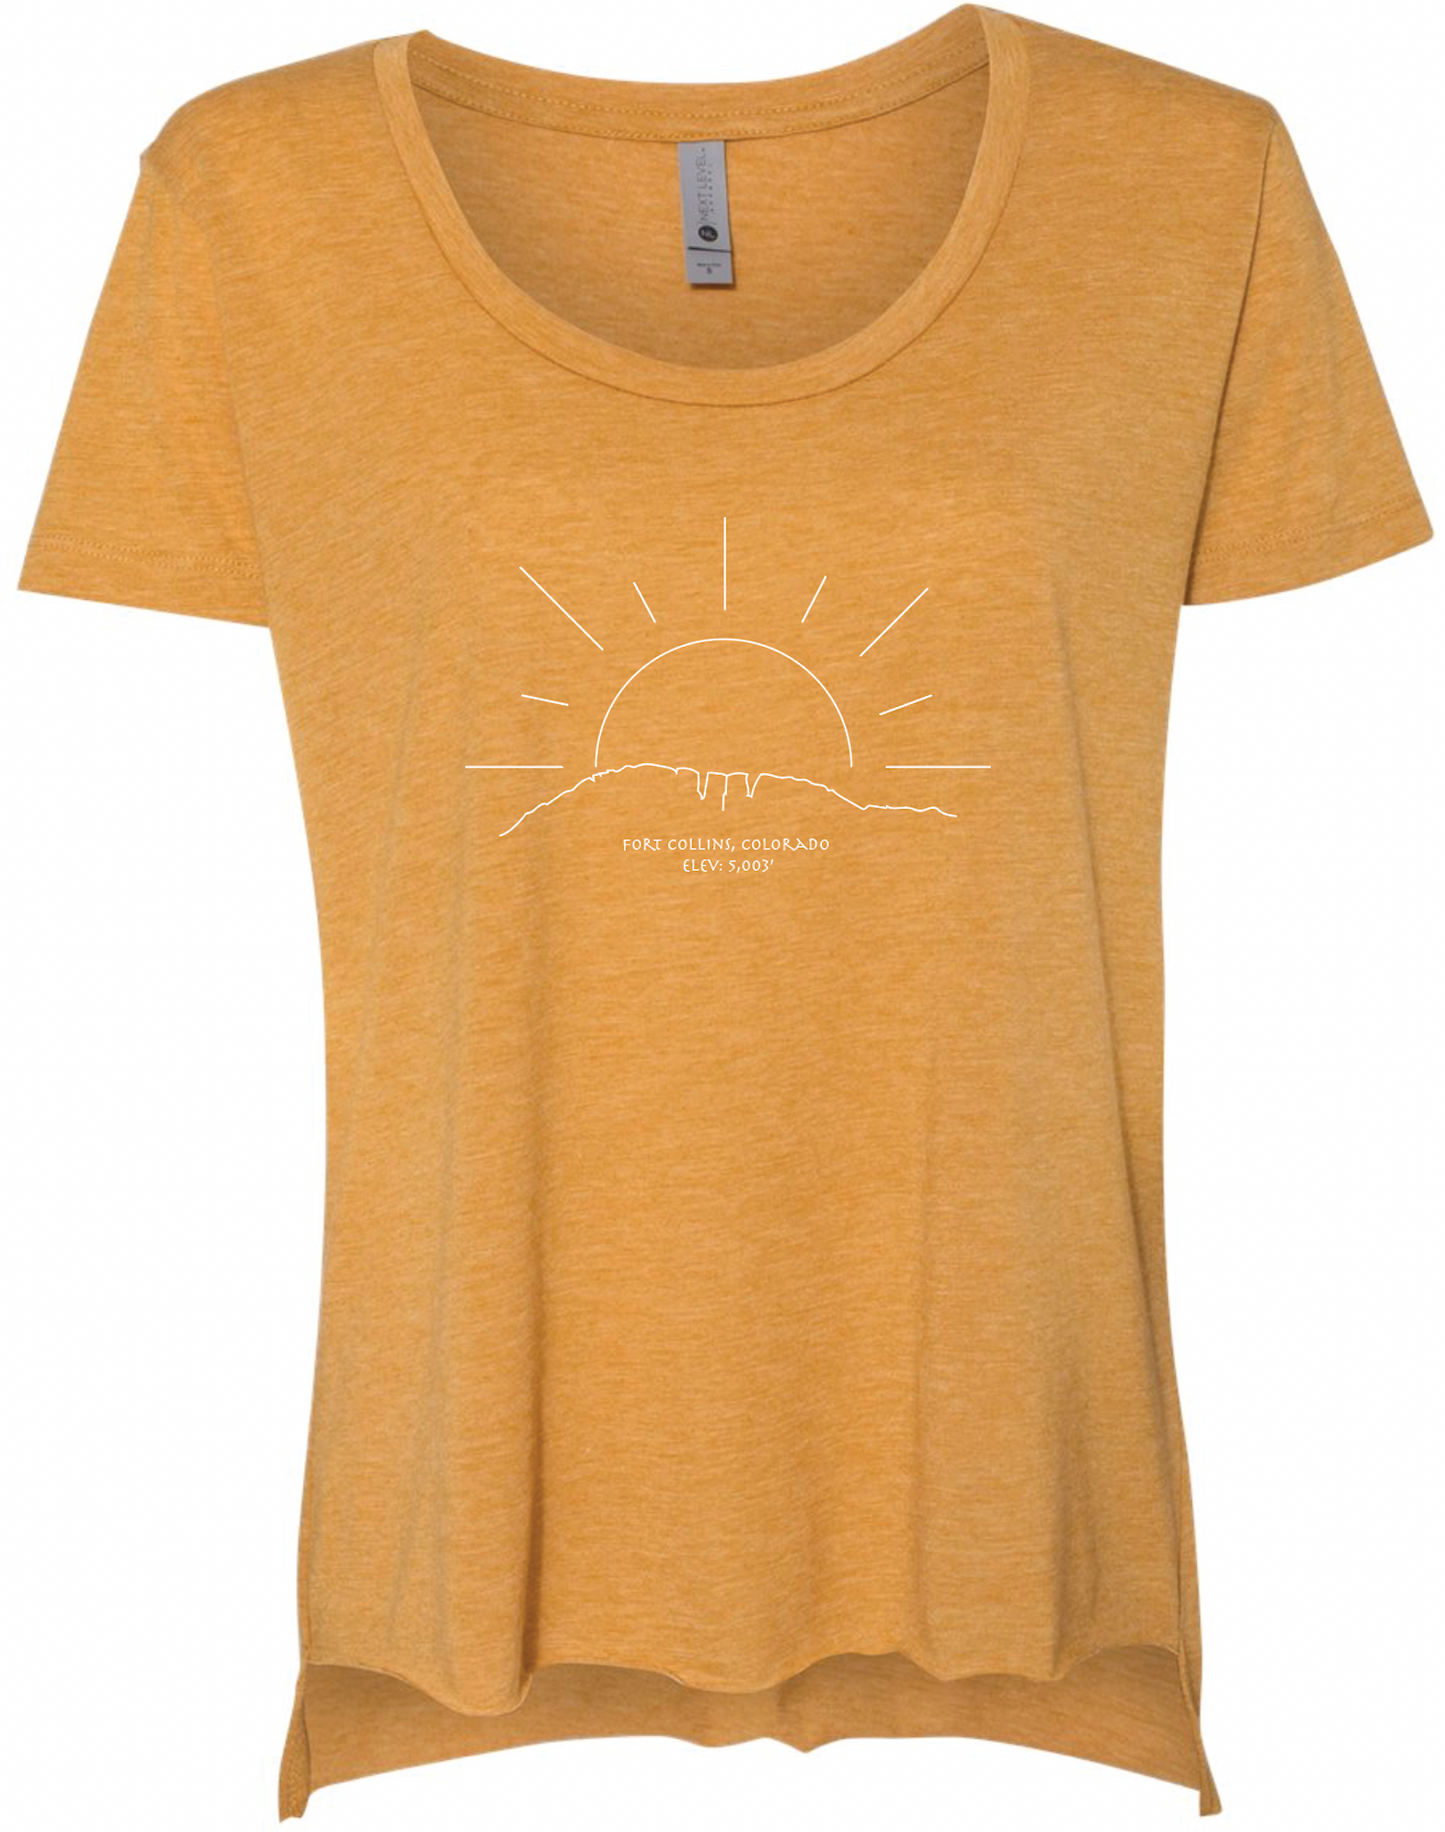 Womens Fort Collins Short Sleeve Tee